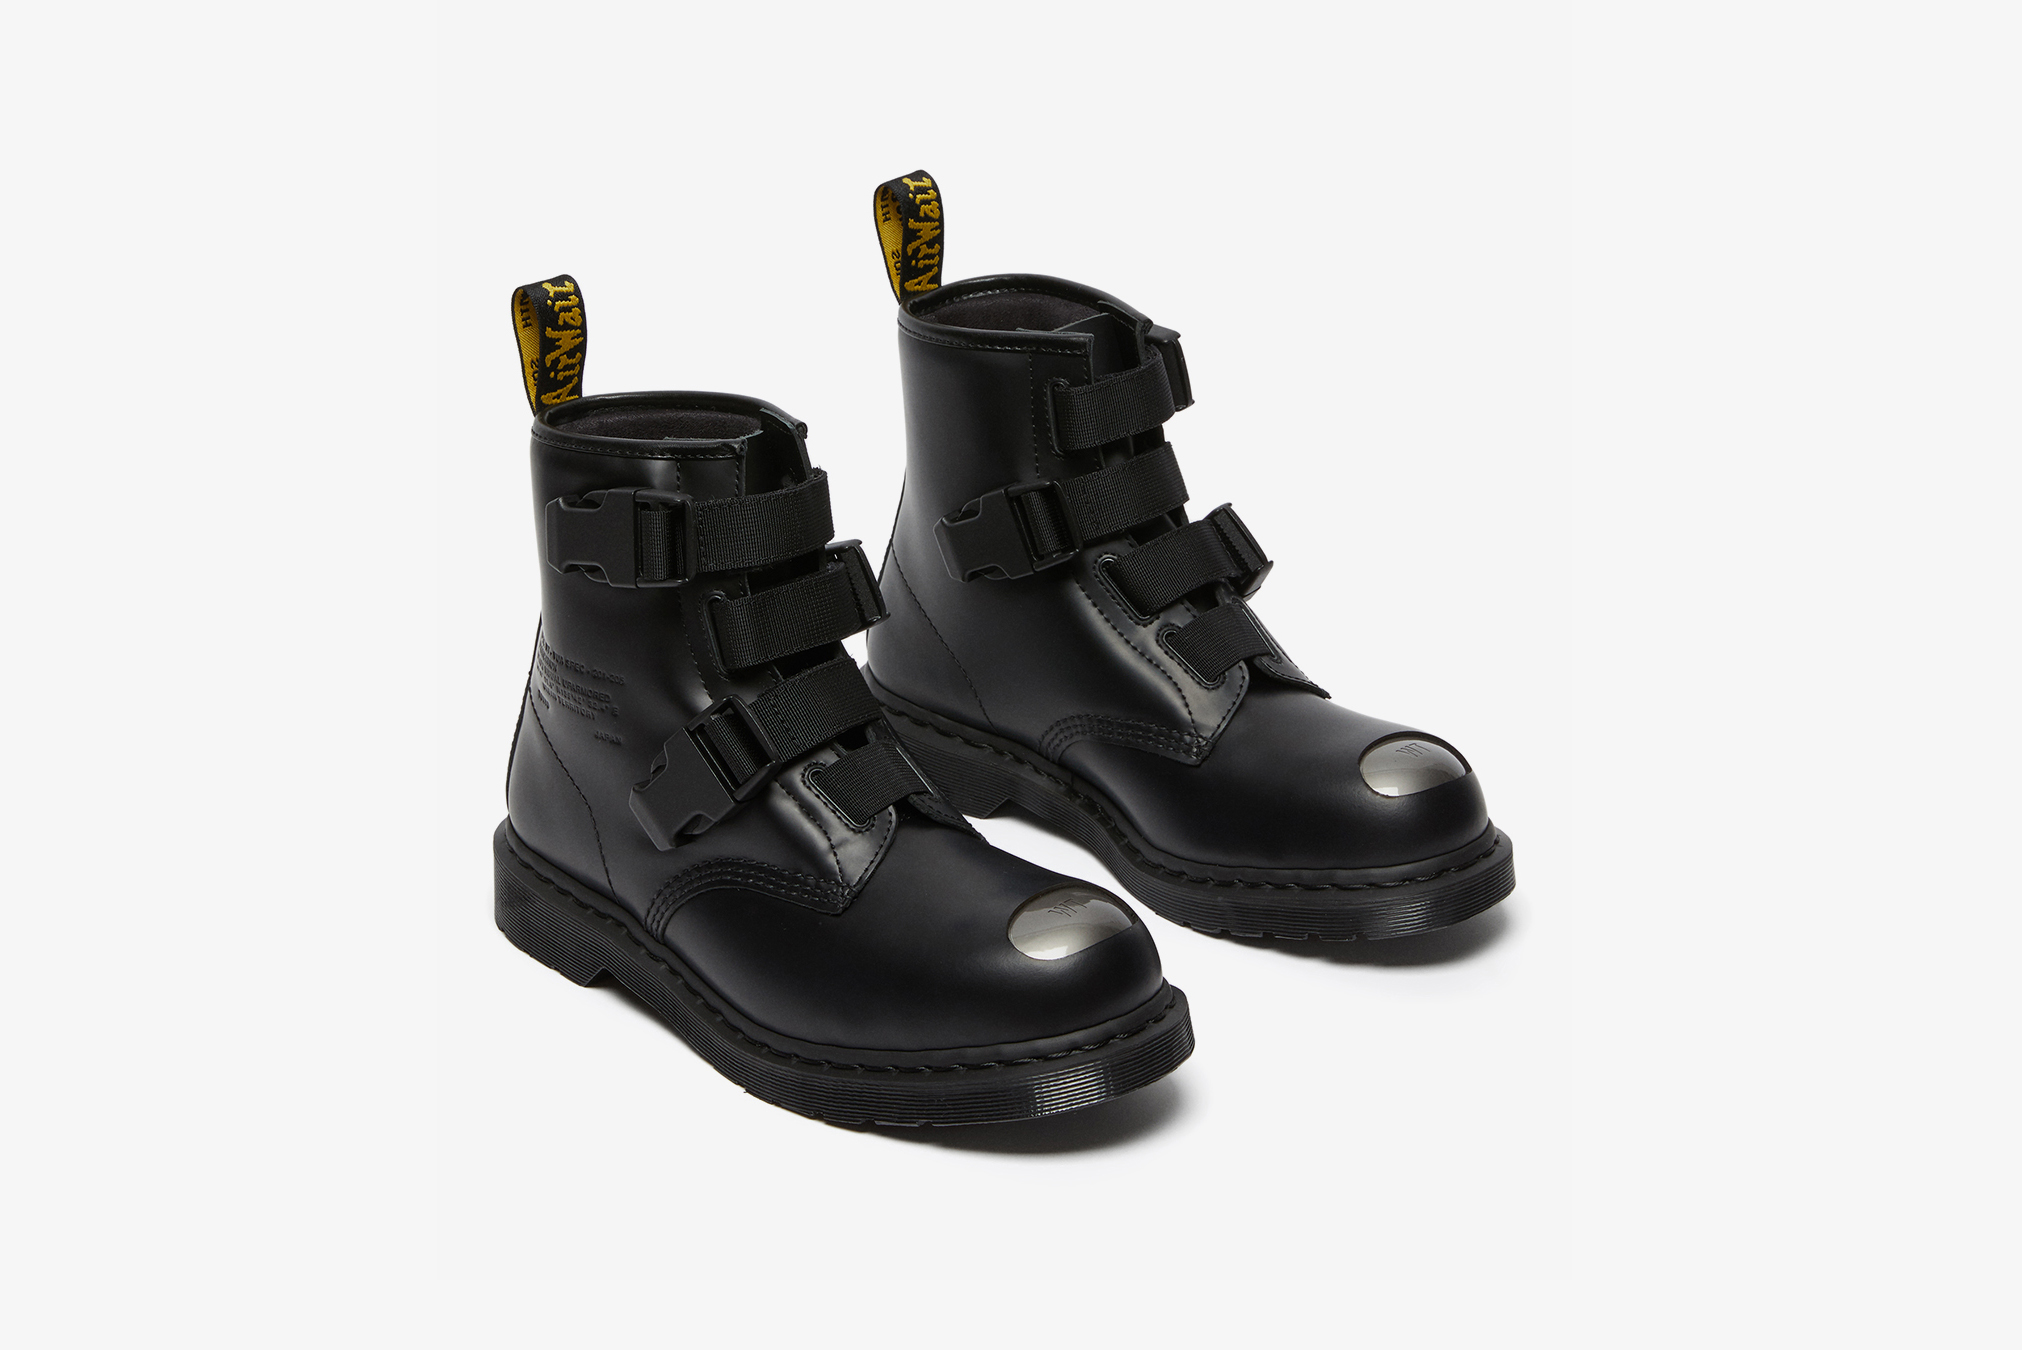 WTAPS Dr.Martens Remastered Boot UK7size - 長靴/レインシューズ